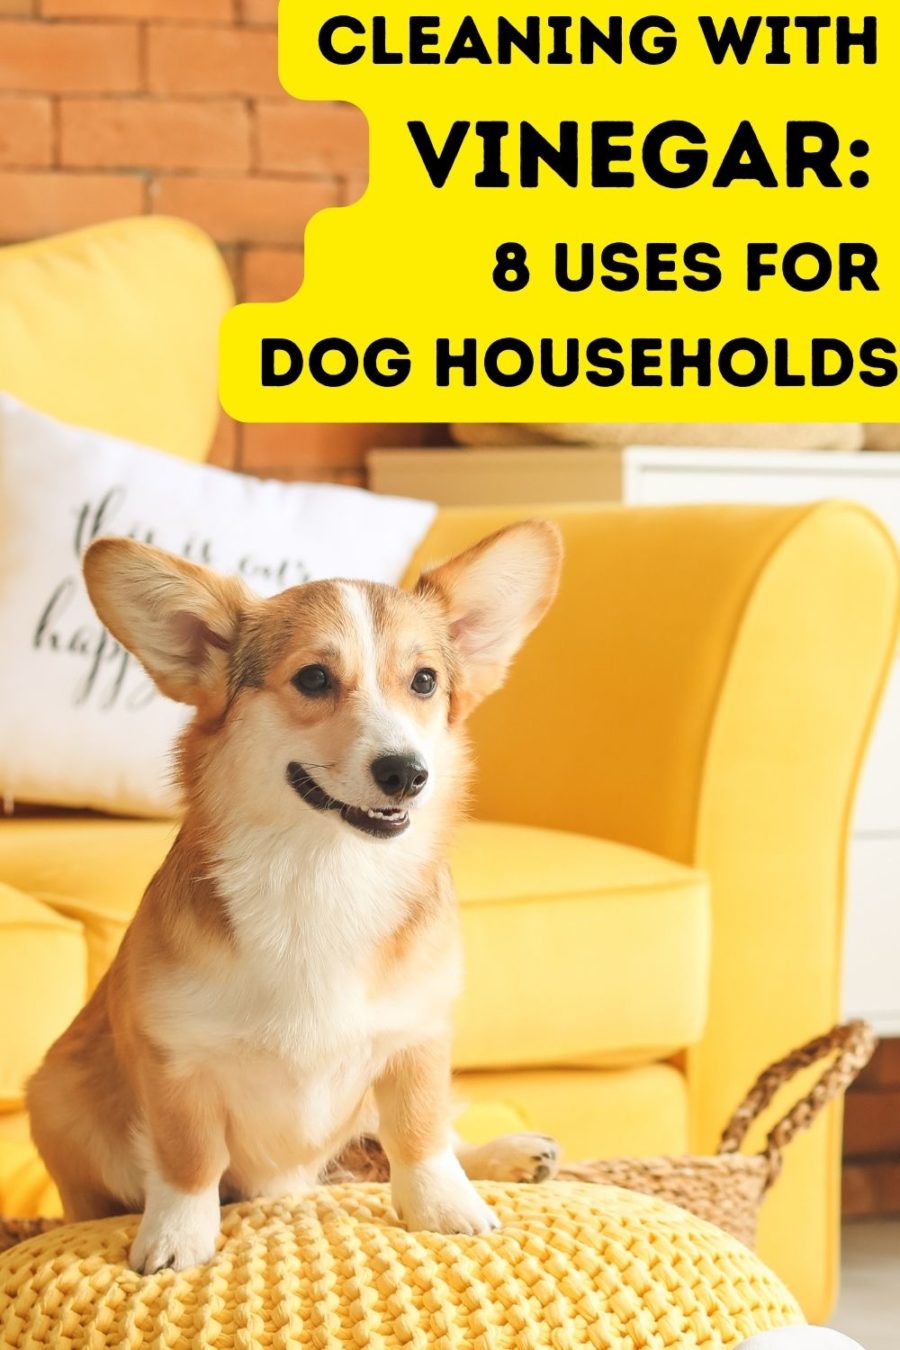 Cleaning with Vinegar: 8 Uses for Dog Households